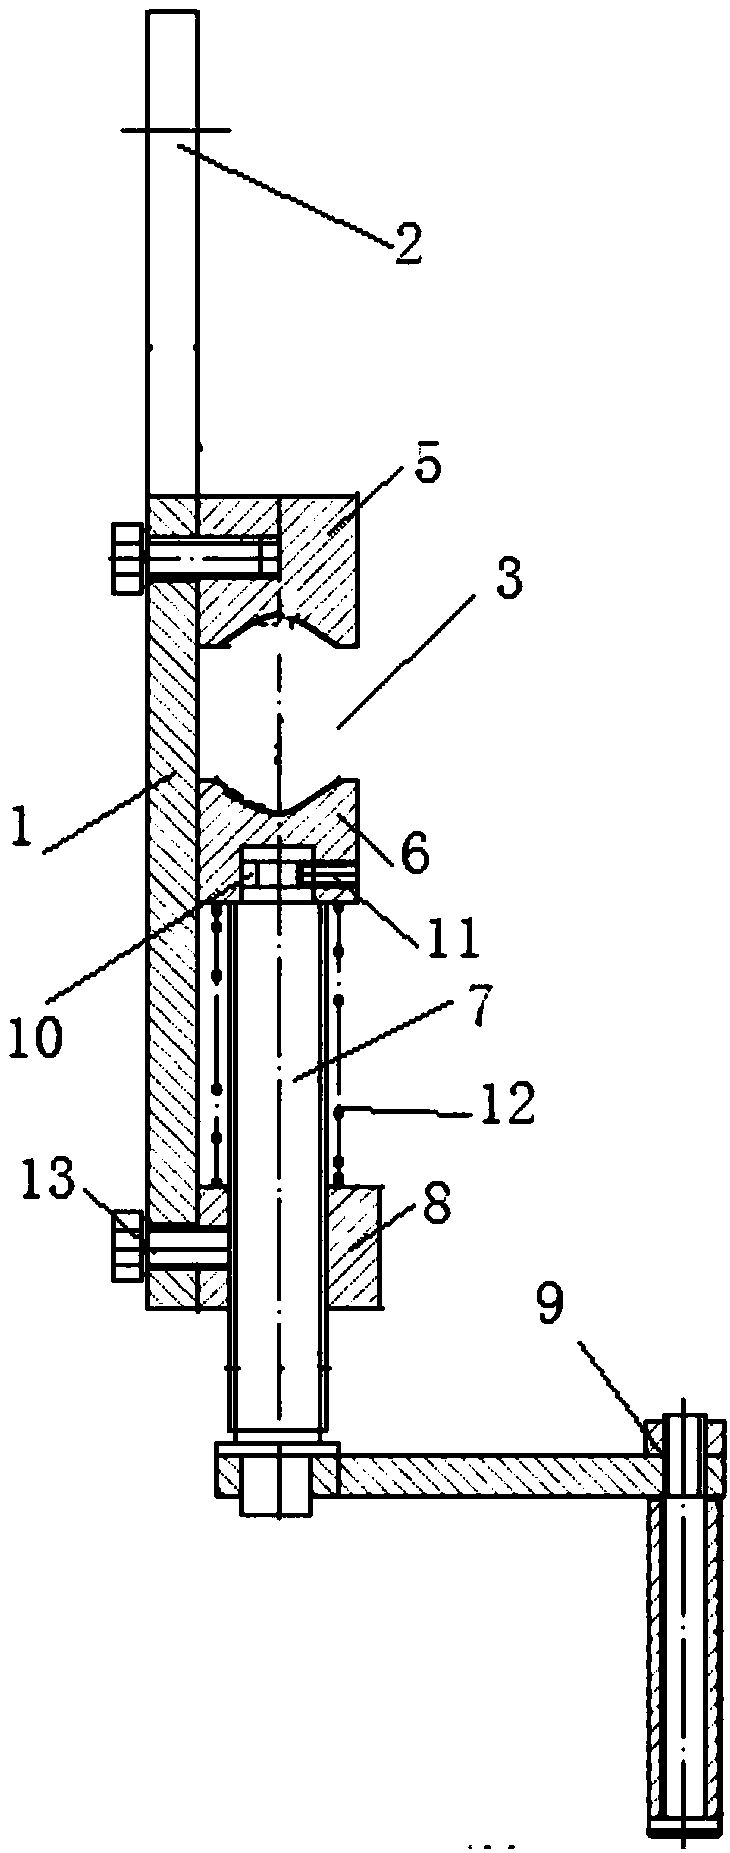 Pull wire replacing anchoring device